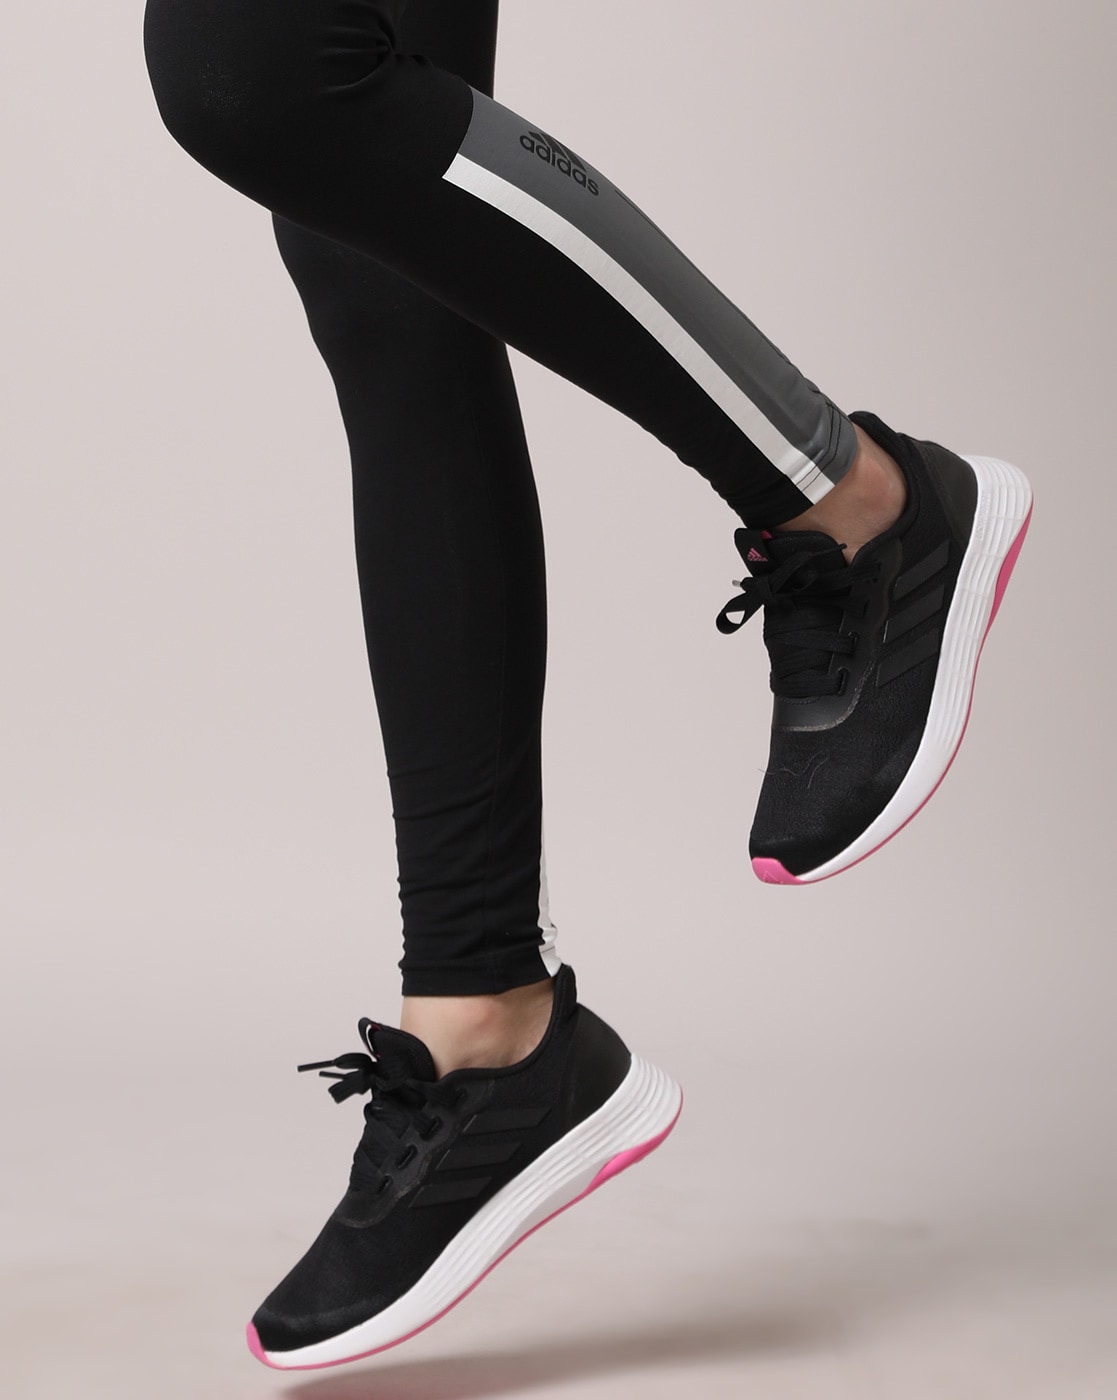 Fashionable Gym wear Jeggings Ankle Length Free Size Workout Trousers   Stretchable Striped Jeggings  Yoga